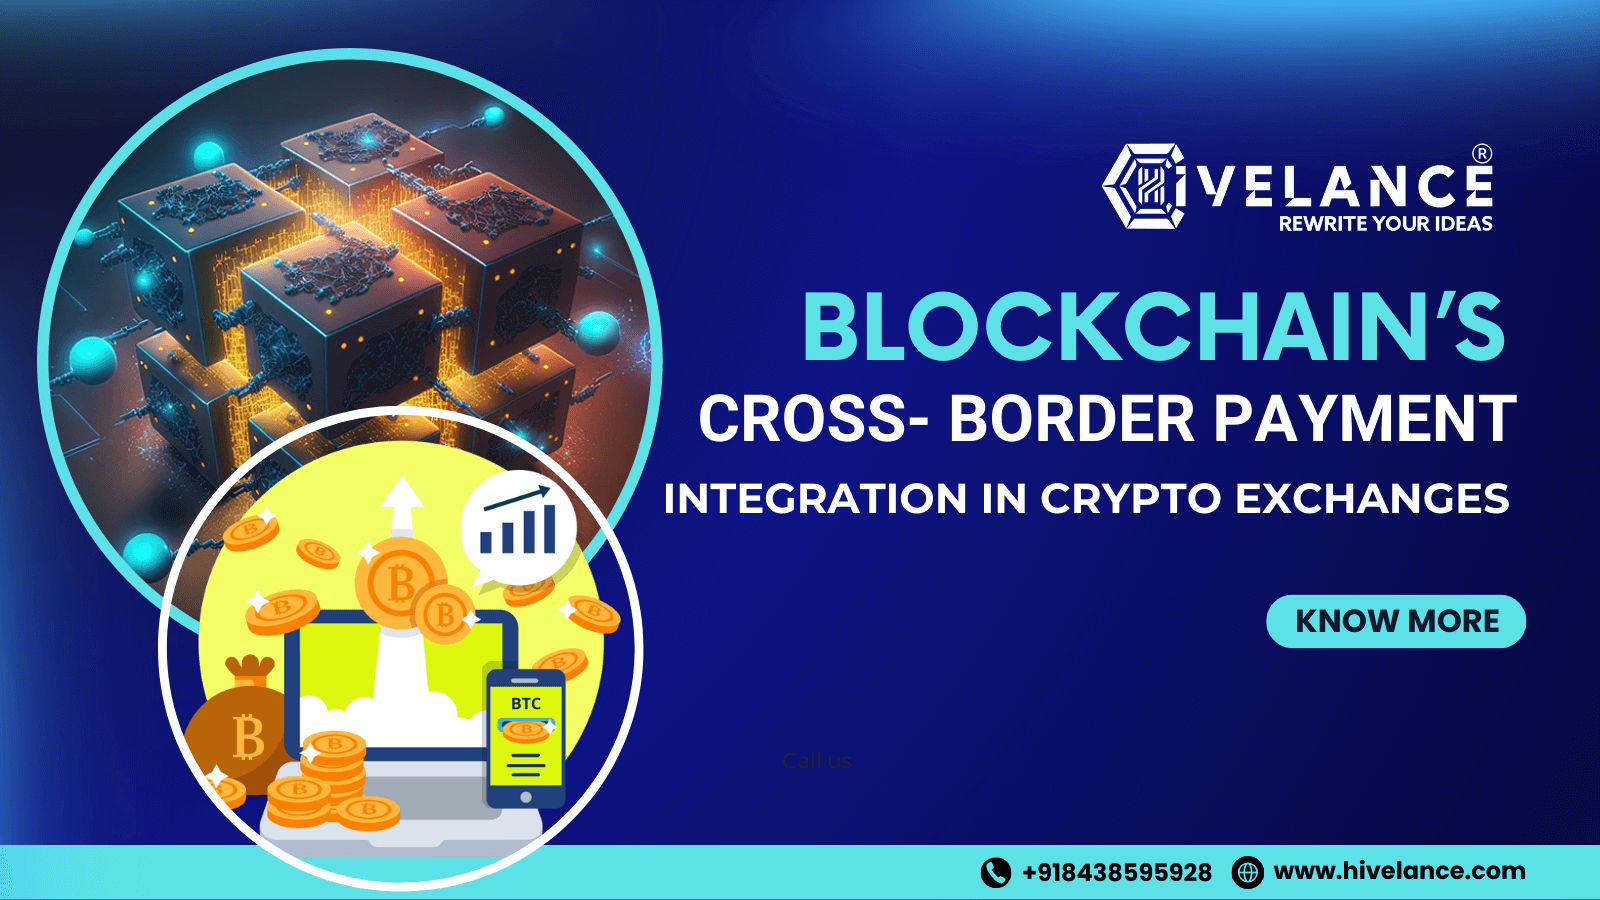 Blockchain’s Cross Border Payment Integration in Crypto Exchanges: An instant guide for beginners